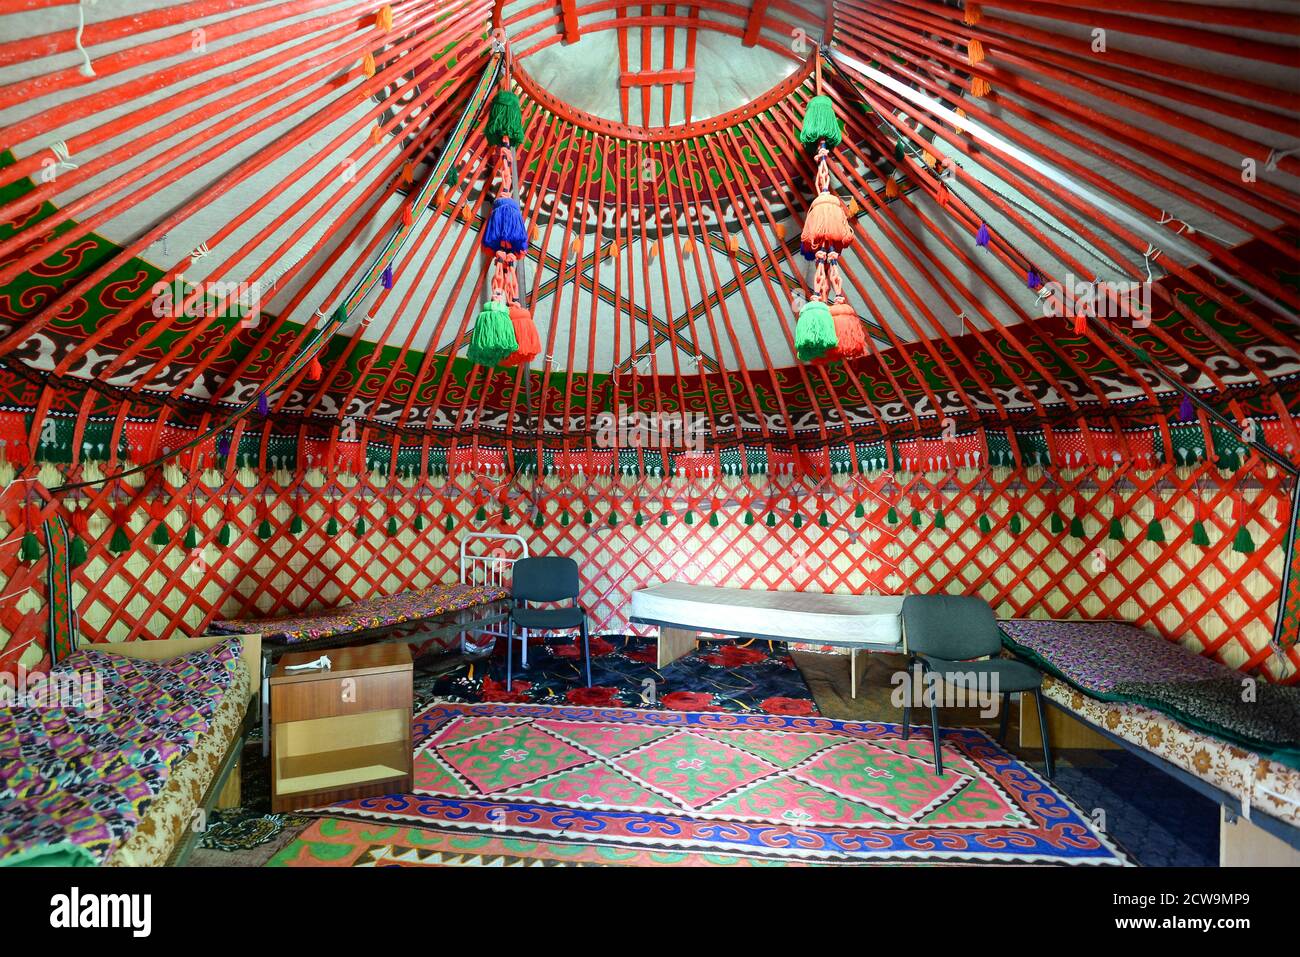 Inside view of a yurt in Bokonbayevo, Kyrgyzstan. Circular tent used as a house by dungan and nomadic groups in Central Asia. Ger interior. Stock Photo